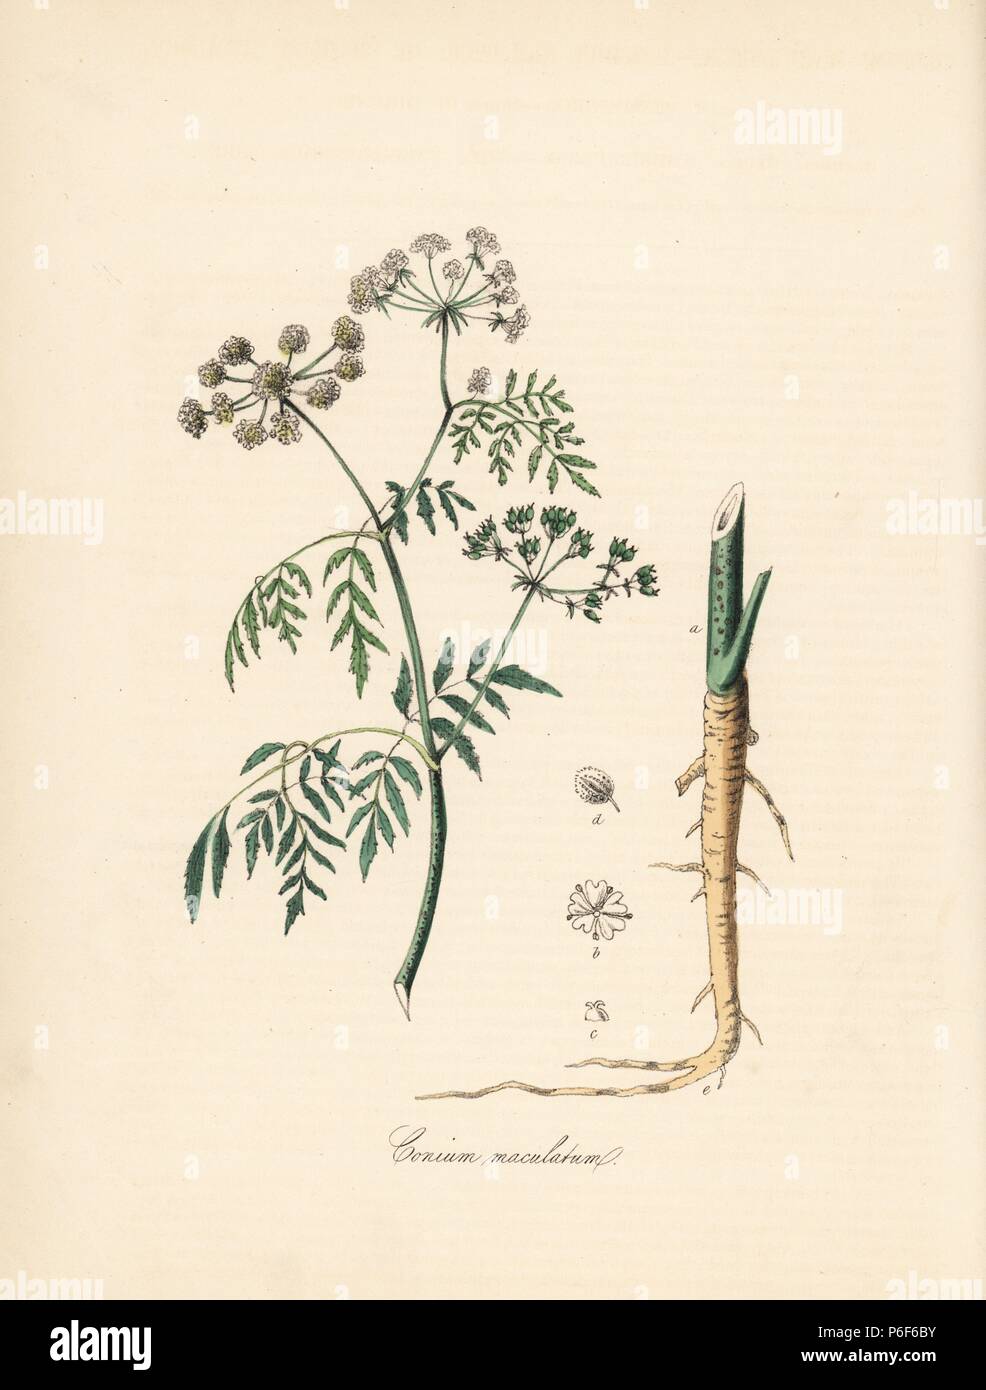 Common, greater, spotted or poison hemlock, Conium maculatum. Handcoloured zincograph by C. Chabot drawn by Miss M. A. Burnett from her 'Plantae Utiliores: or Illustrations of Useful Plants,' Whittaker, London, 1842. Miss Burnett drew the botanical illustrations, but the text was chiefly by her late brother, British botanist Gilbert Thomas Burnett (1800-1835). Stock Photo